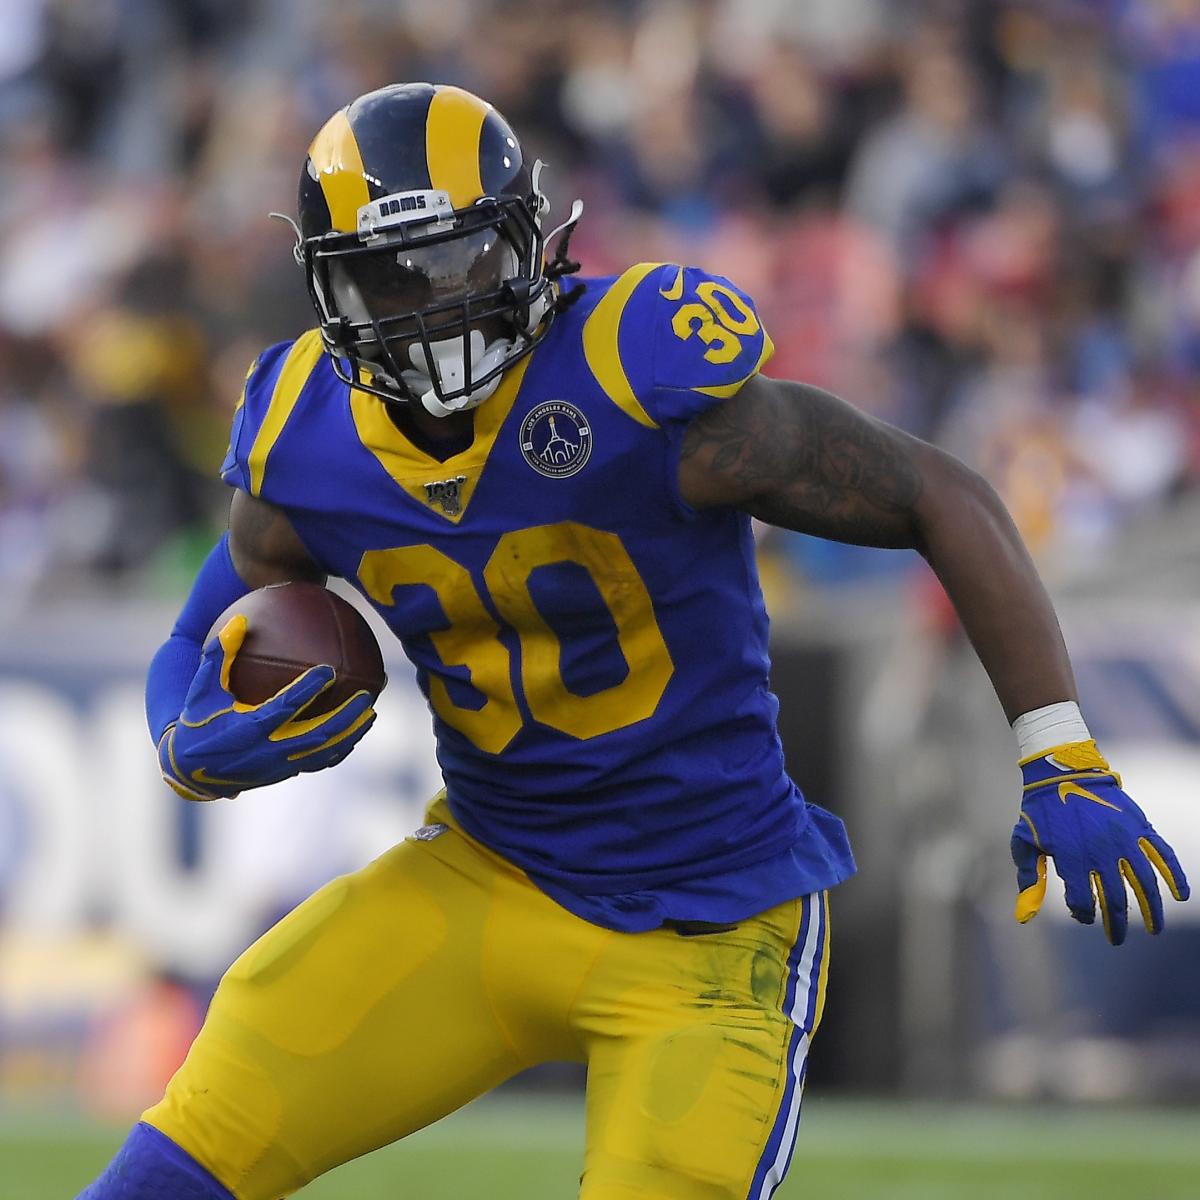 NFL Free Agency 2020 Rumors Tracker Gurley "Likelier Than Not" to Be